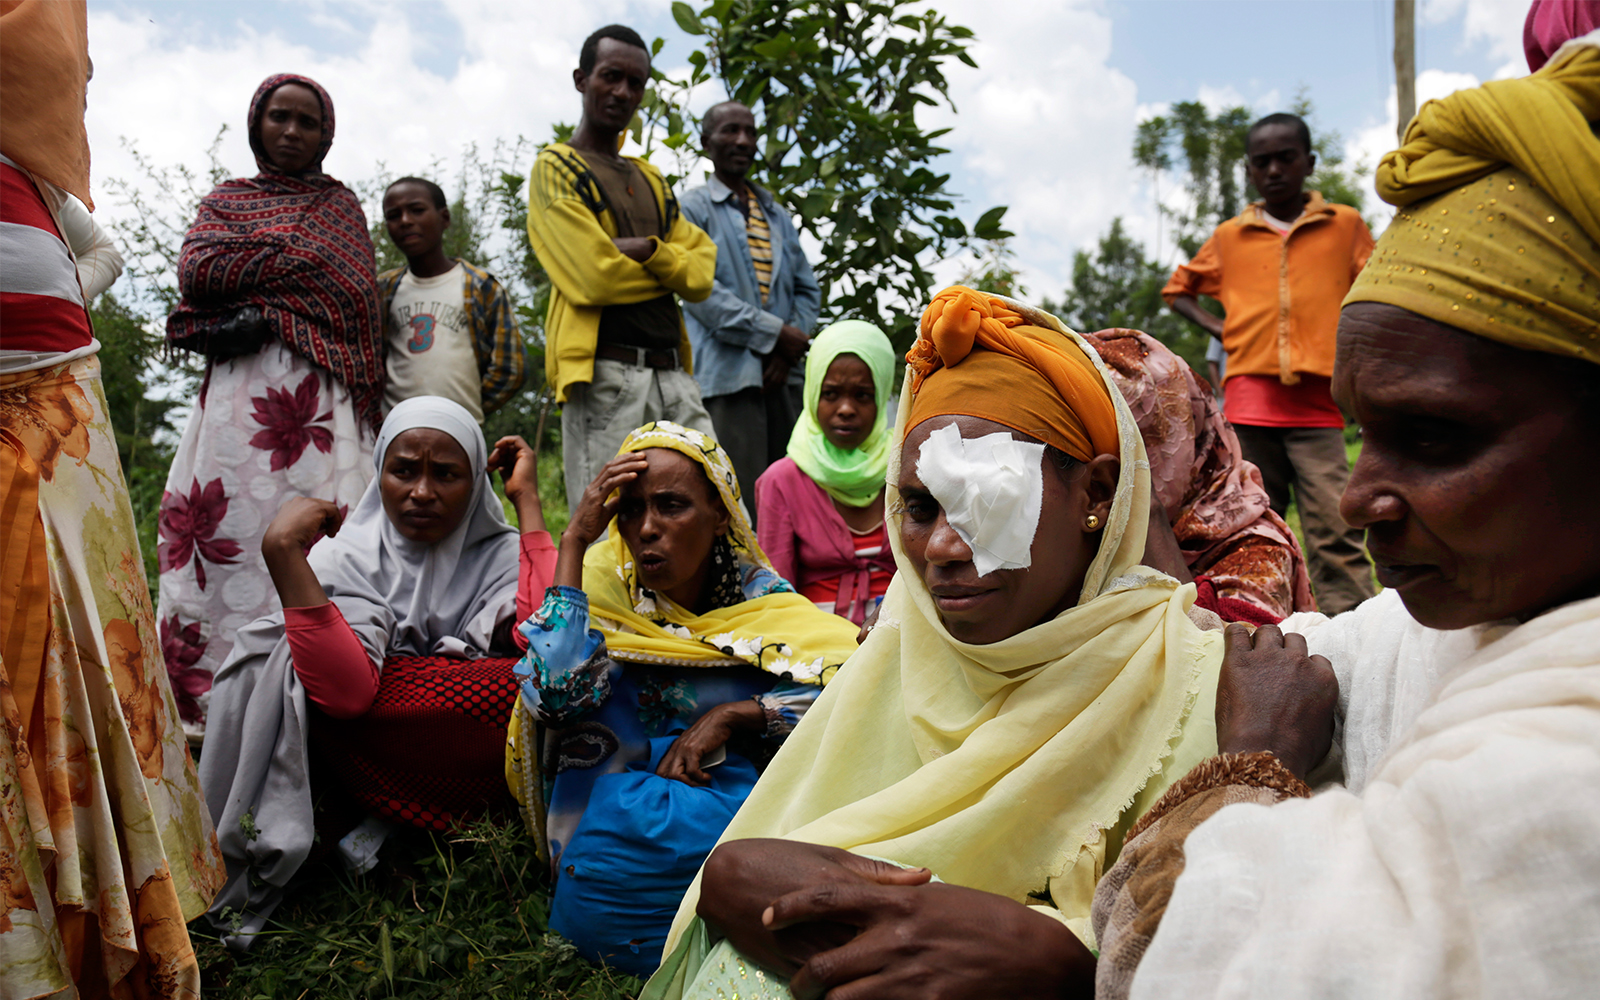 18 million plus people treated for trachoma in 2016